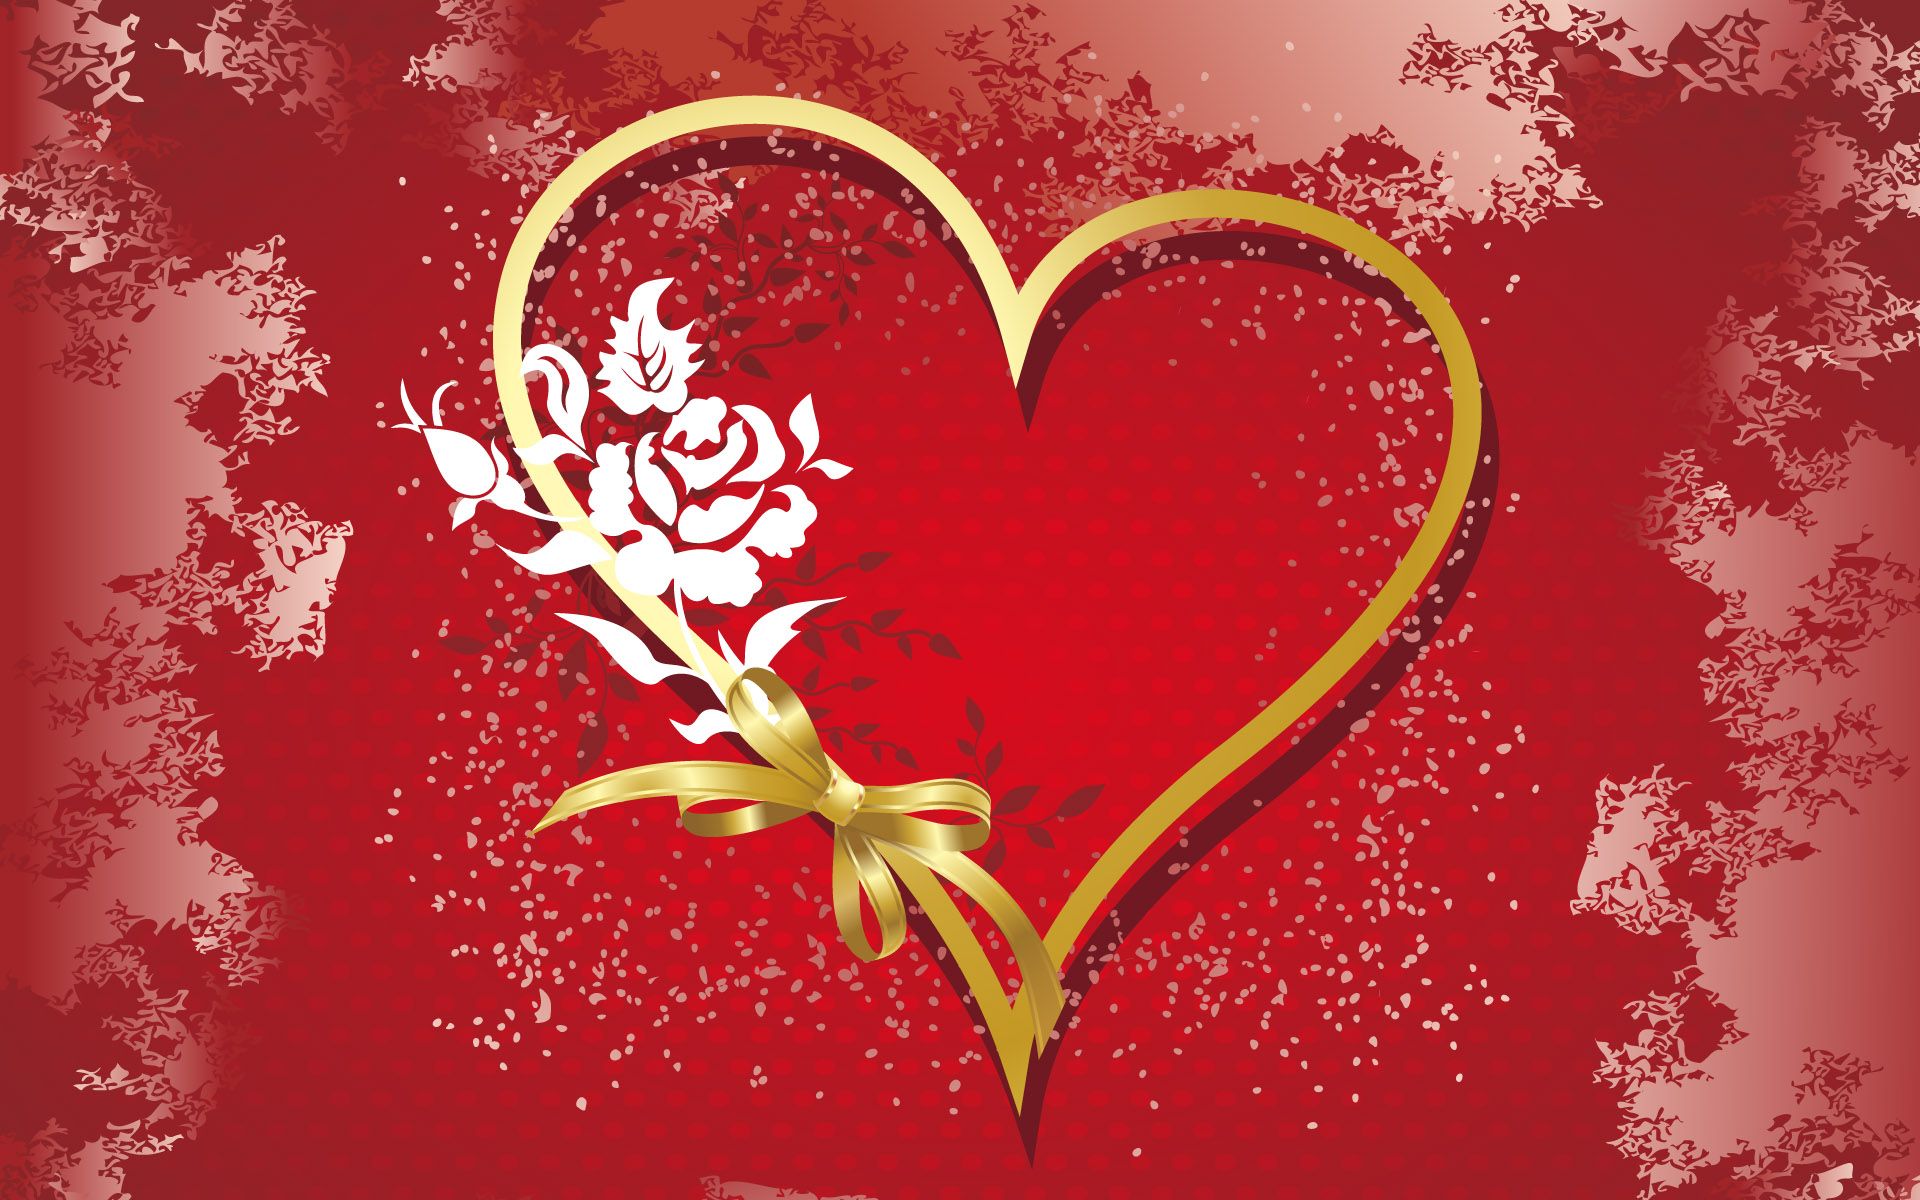 Love wallpapers free download